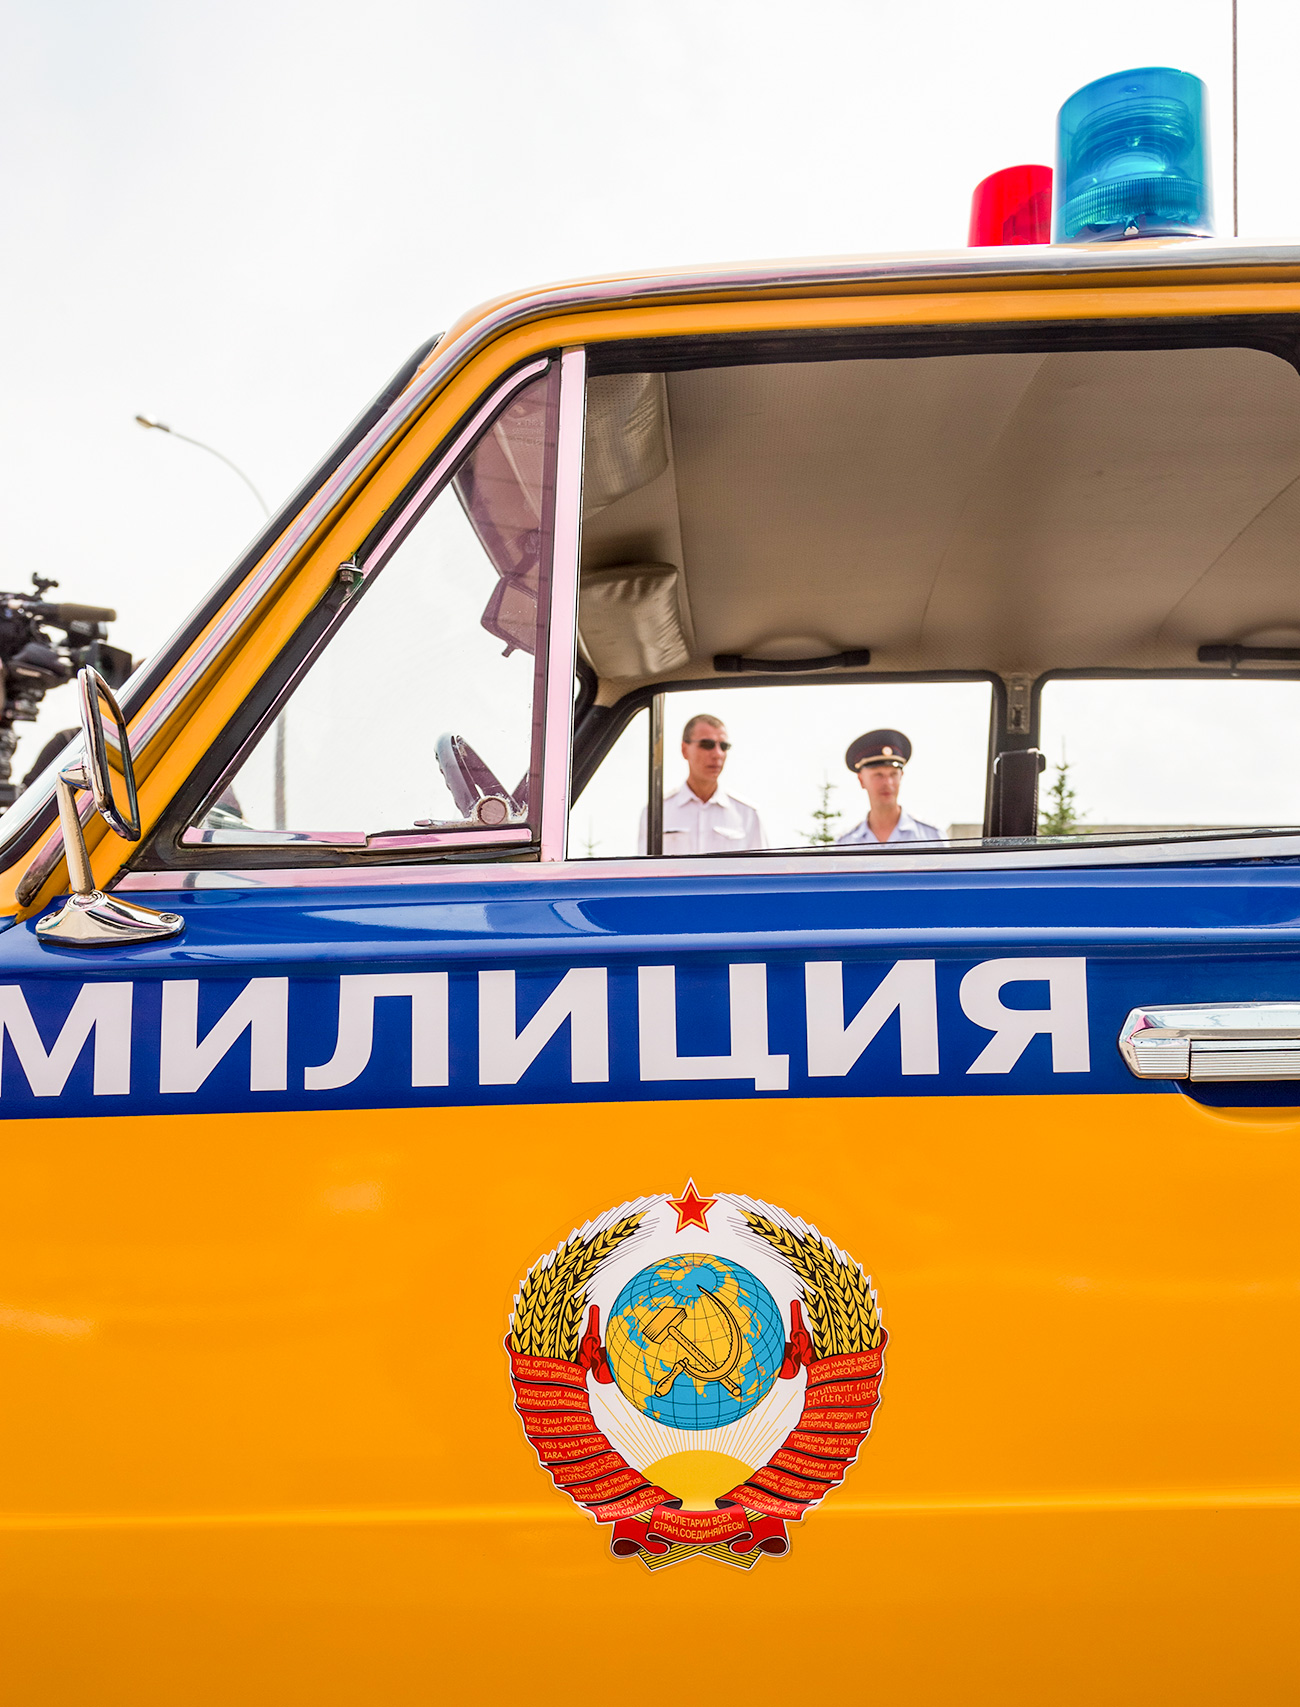 At first, VAZ vehicles were supplied to other countries under its original name Zhiguli. But since the word was confused among consumers with the word “Gigolo,” the export name was changed to Lada.